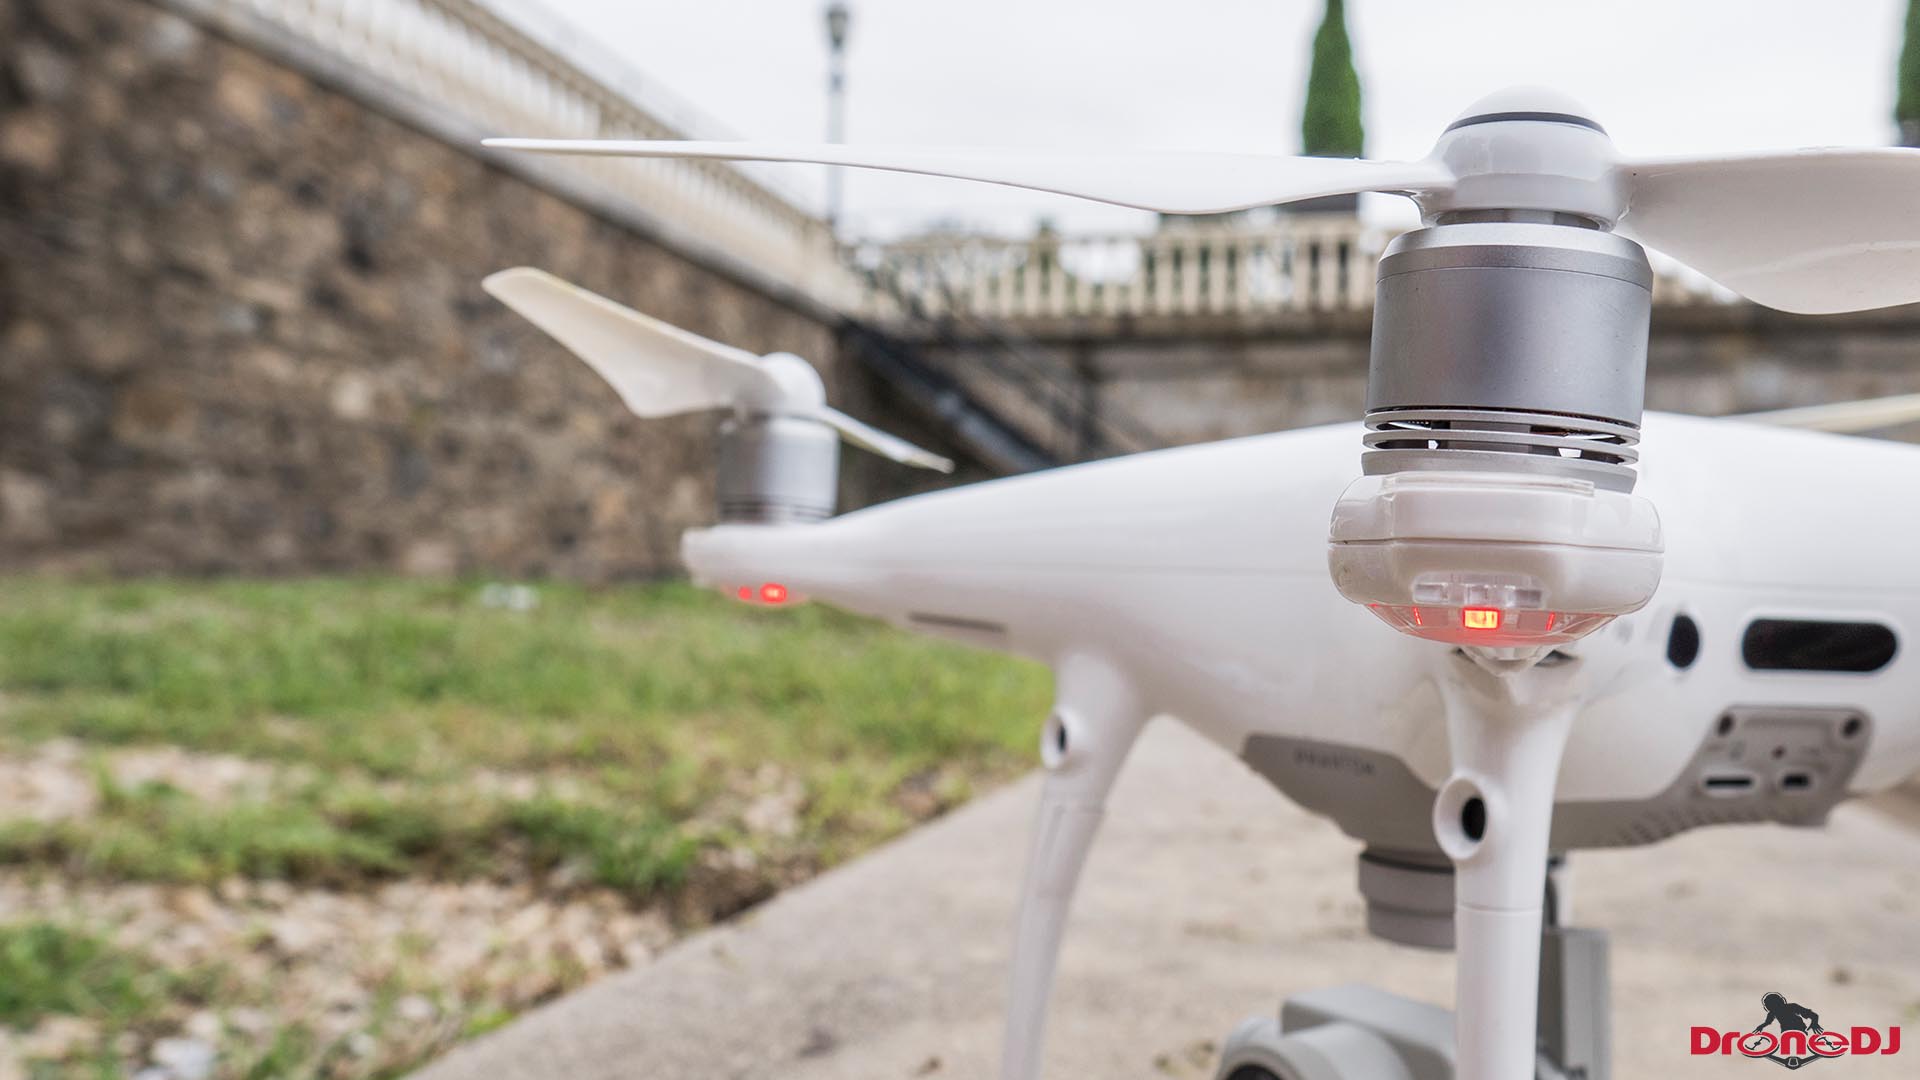 The DJI Phantom 4 Pro is the best drone that you can buy (review)